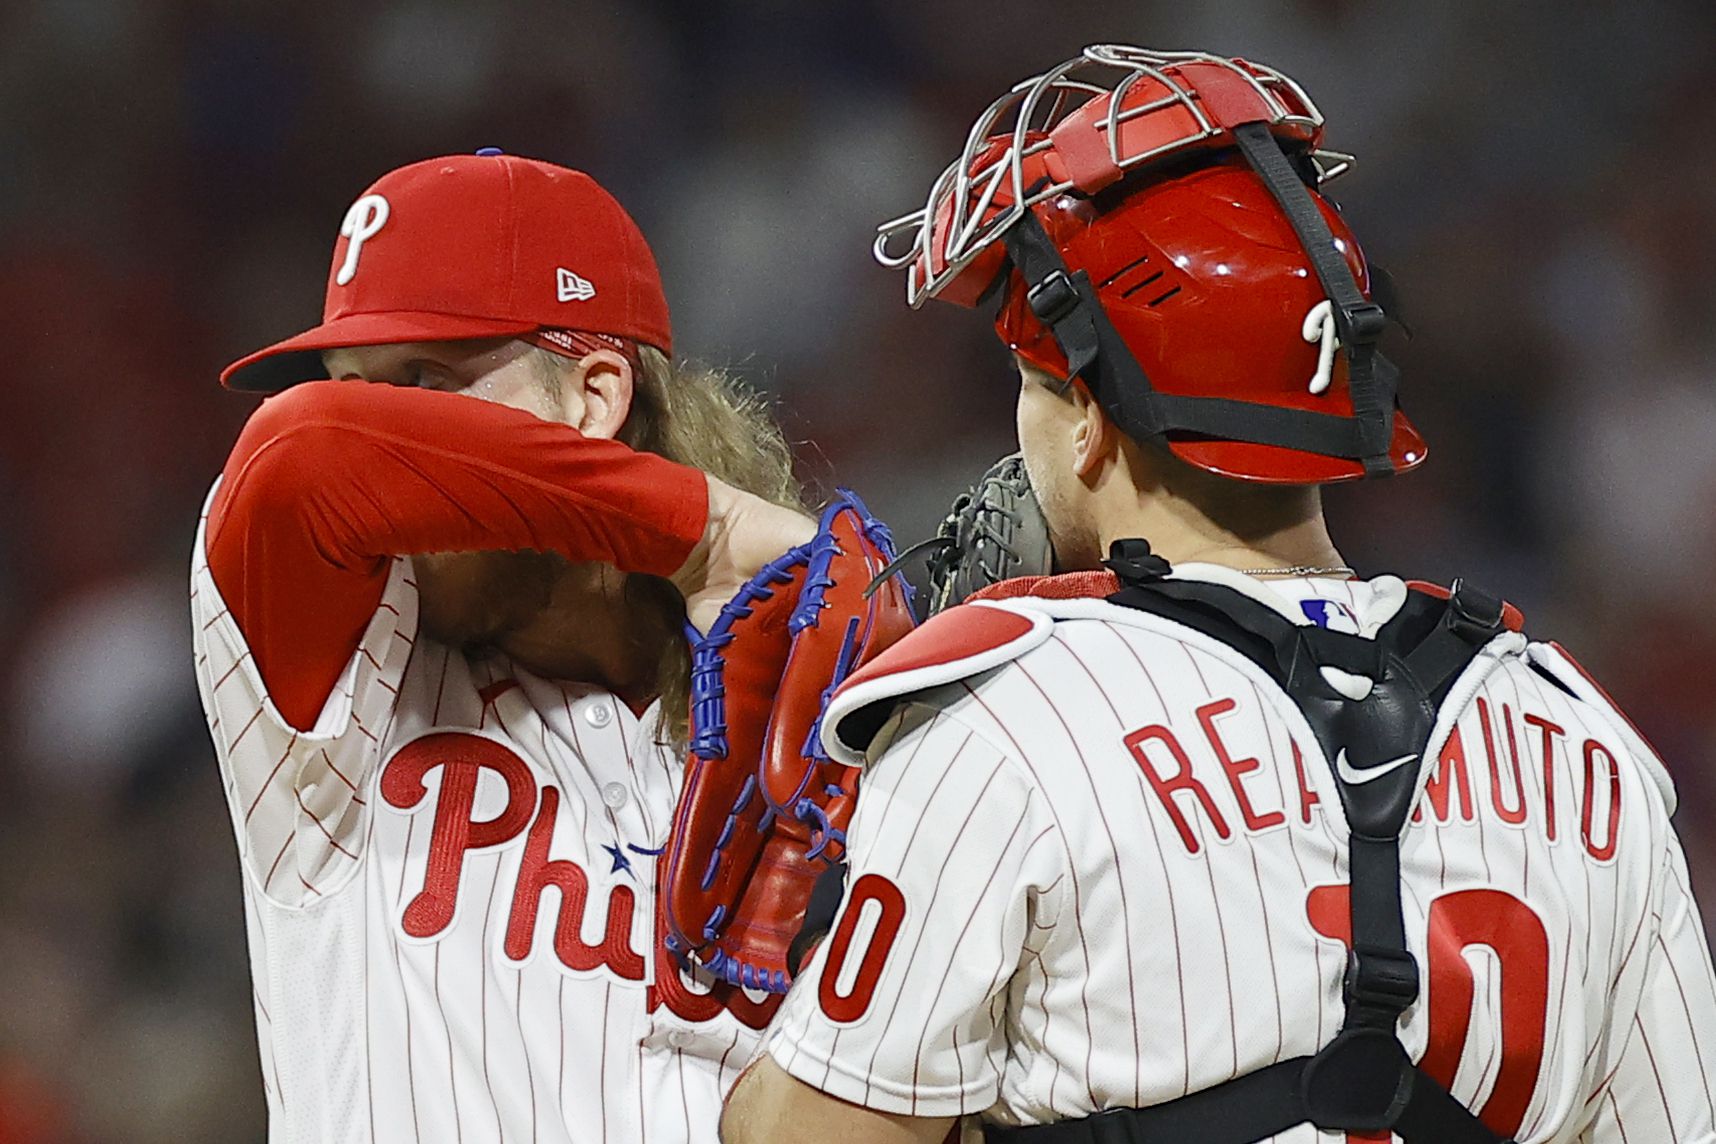 Burrell has a blast: Slugger's late homer lifts Phillies to